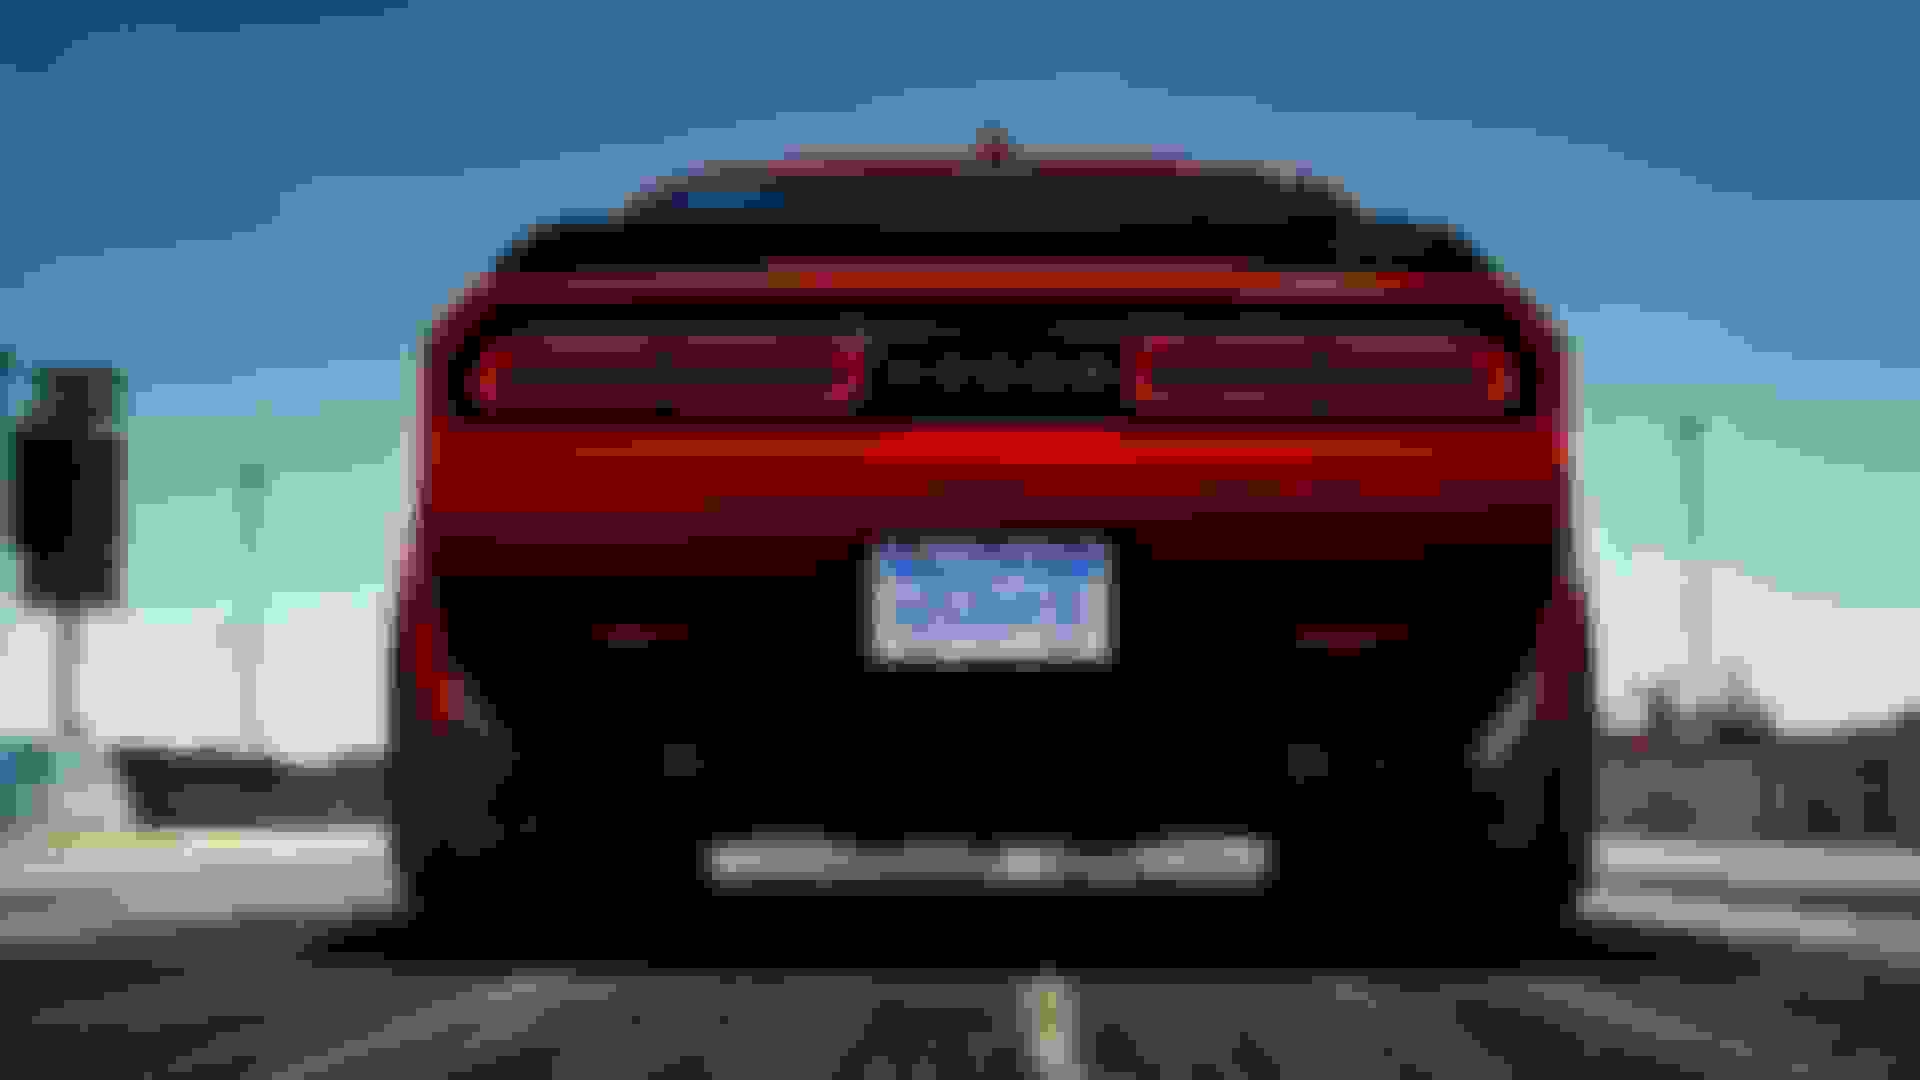 Dodge Planning Challenger With 909 HP That Runs on E85 Fuel